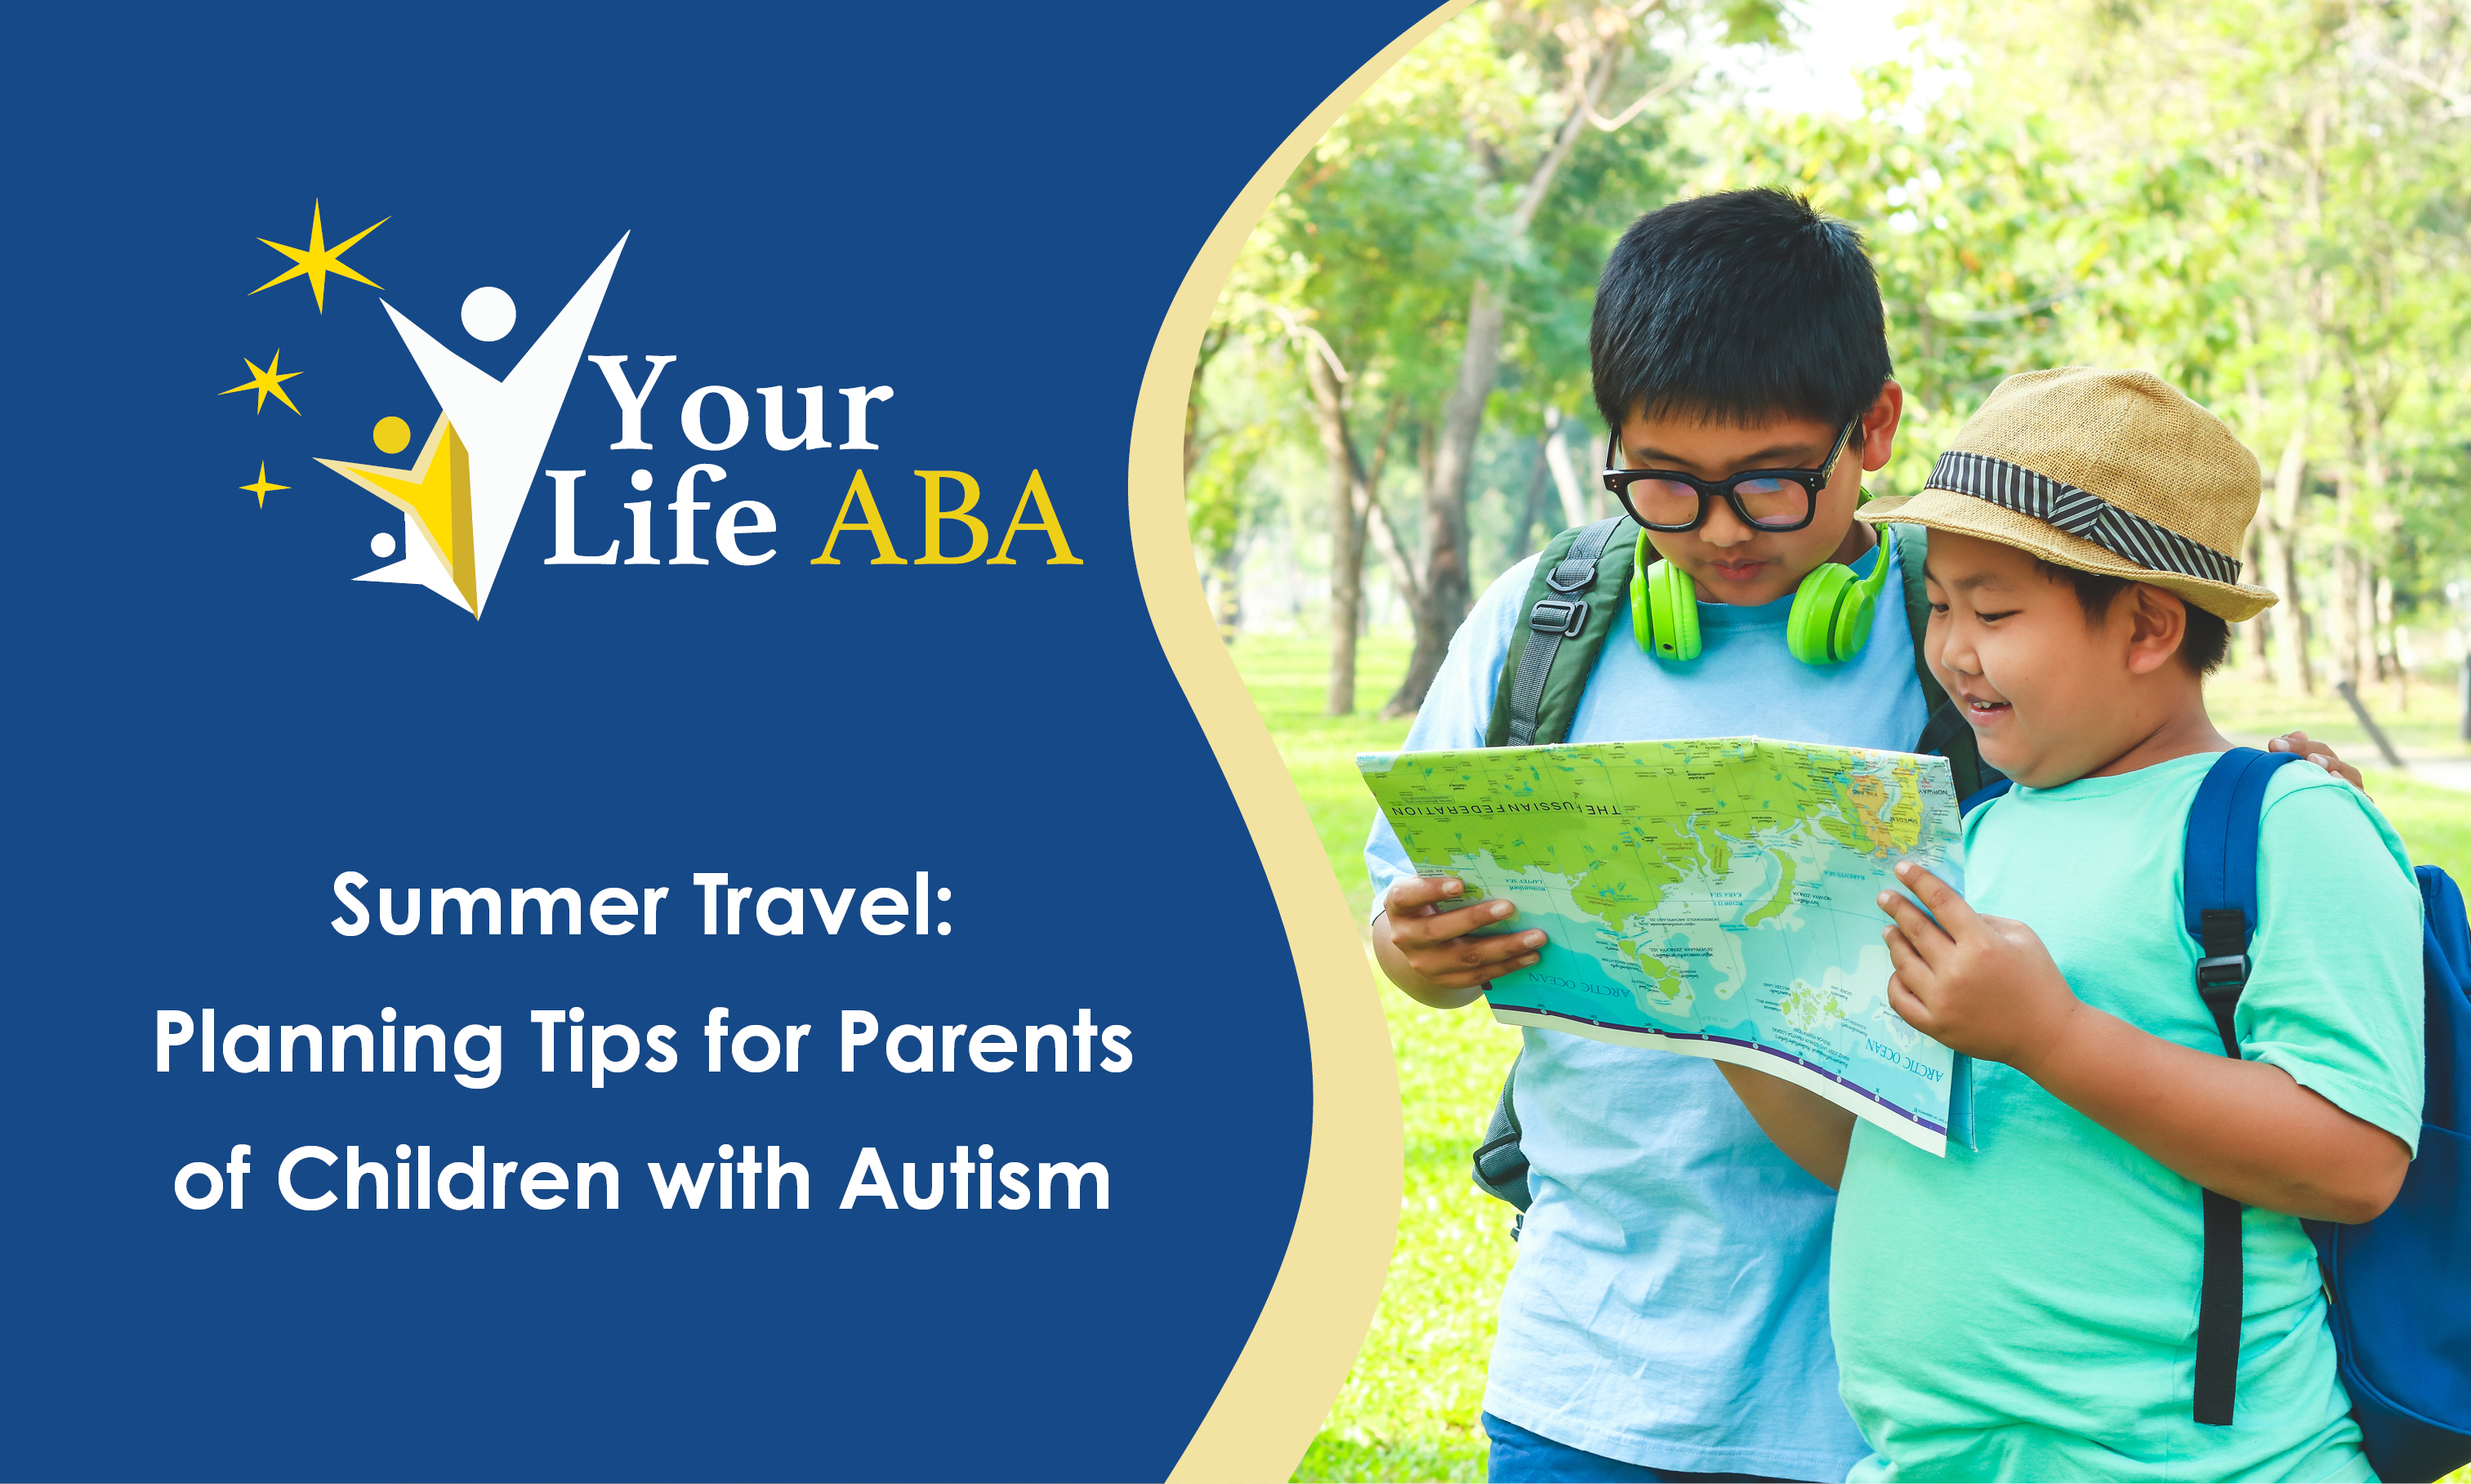 Summer Travel: Planning Tips for Parents of Children with Autism